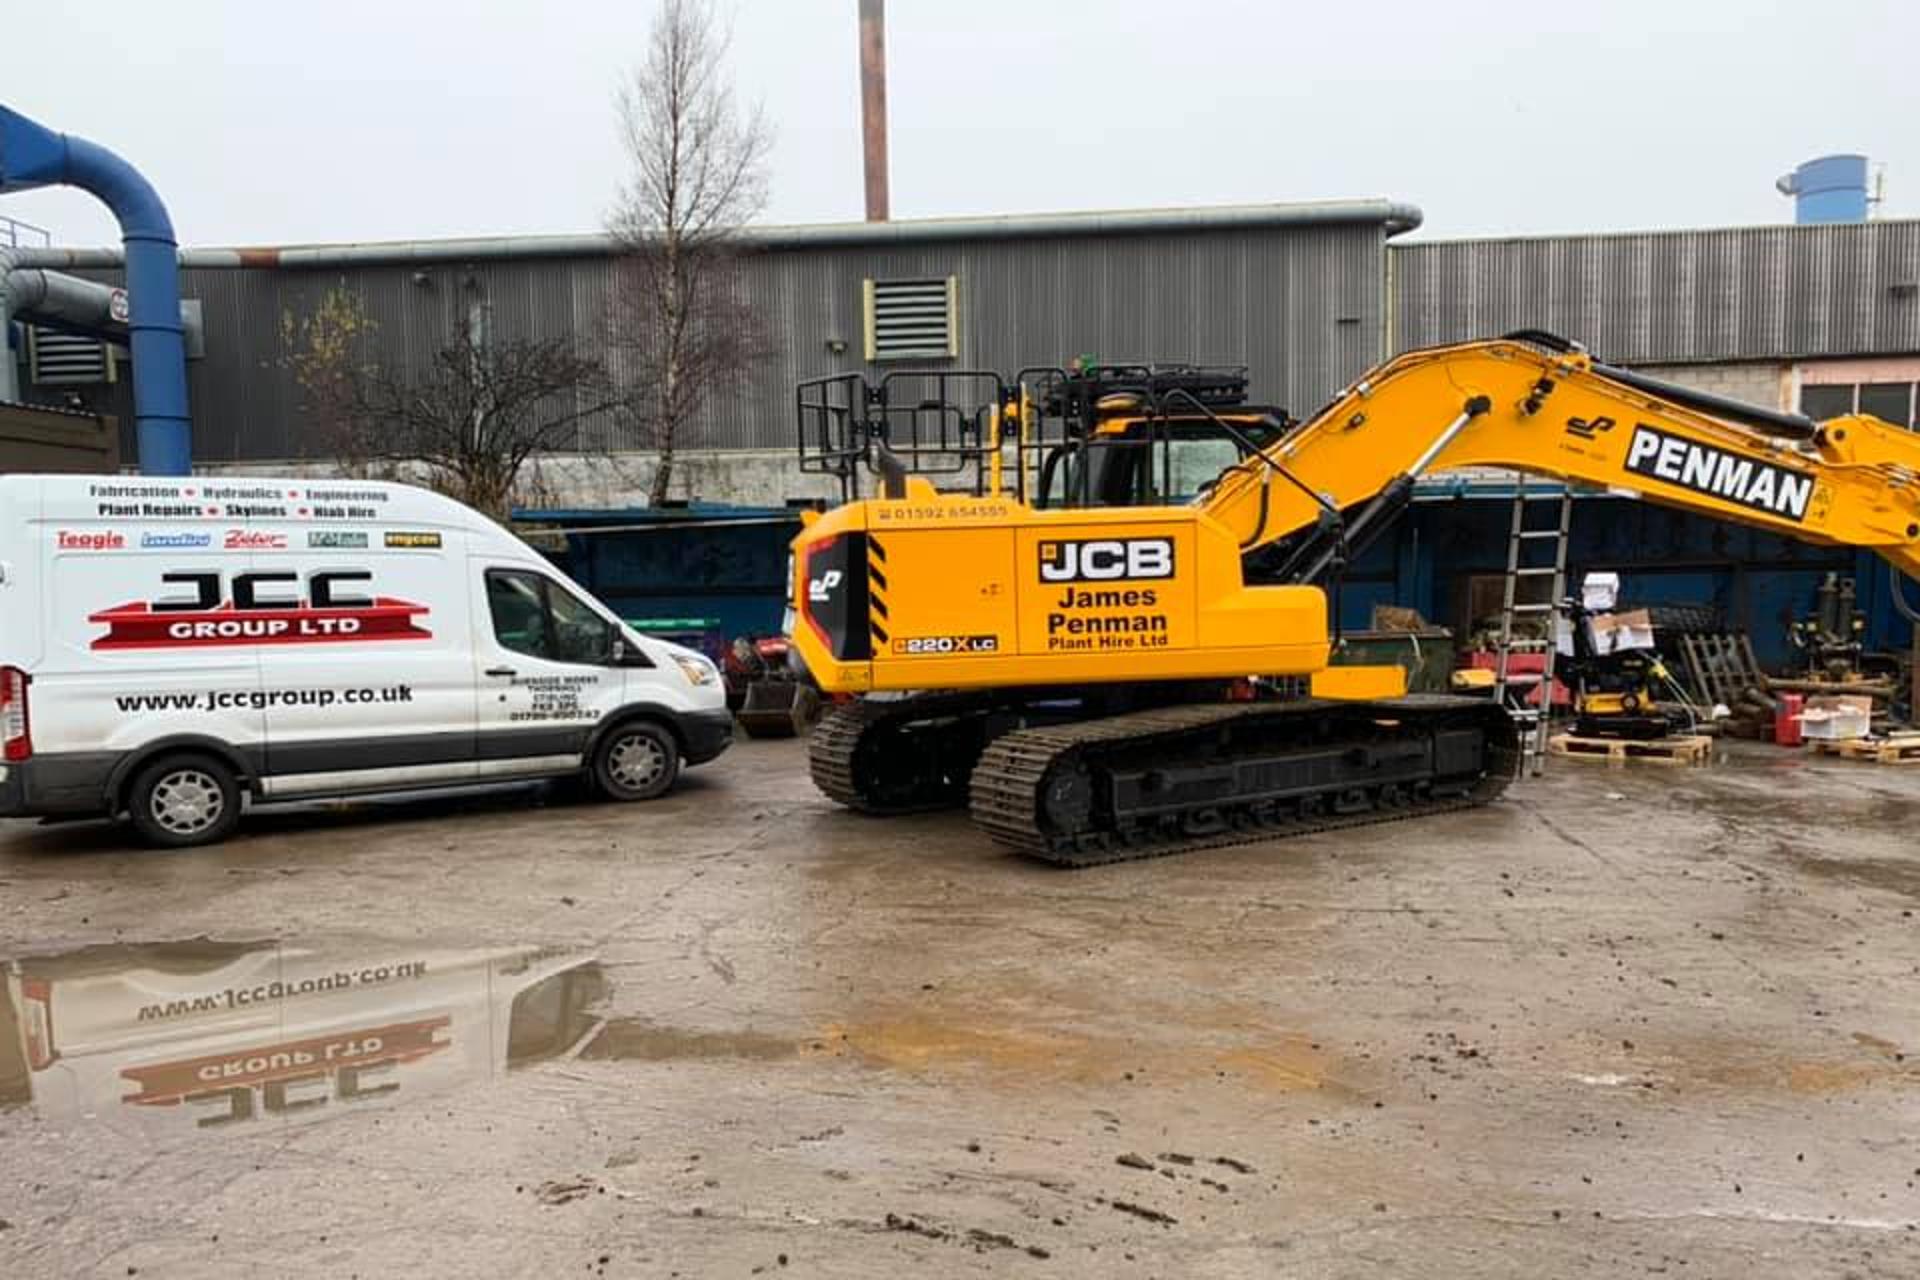 Kirkcaldy plant hire firm placed into liquidation